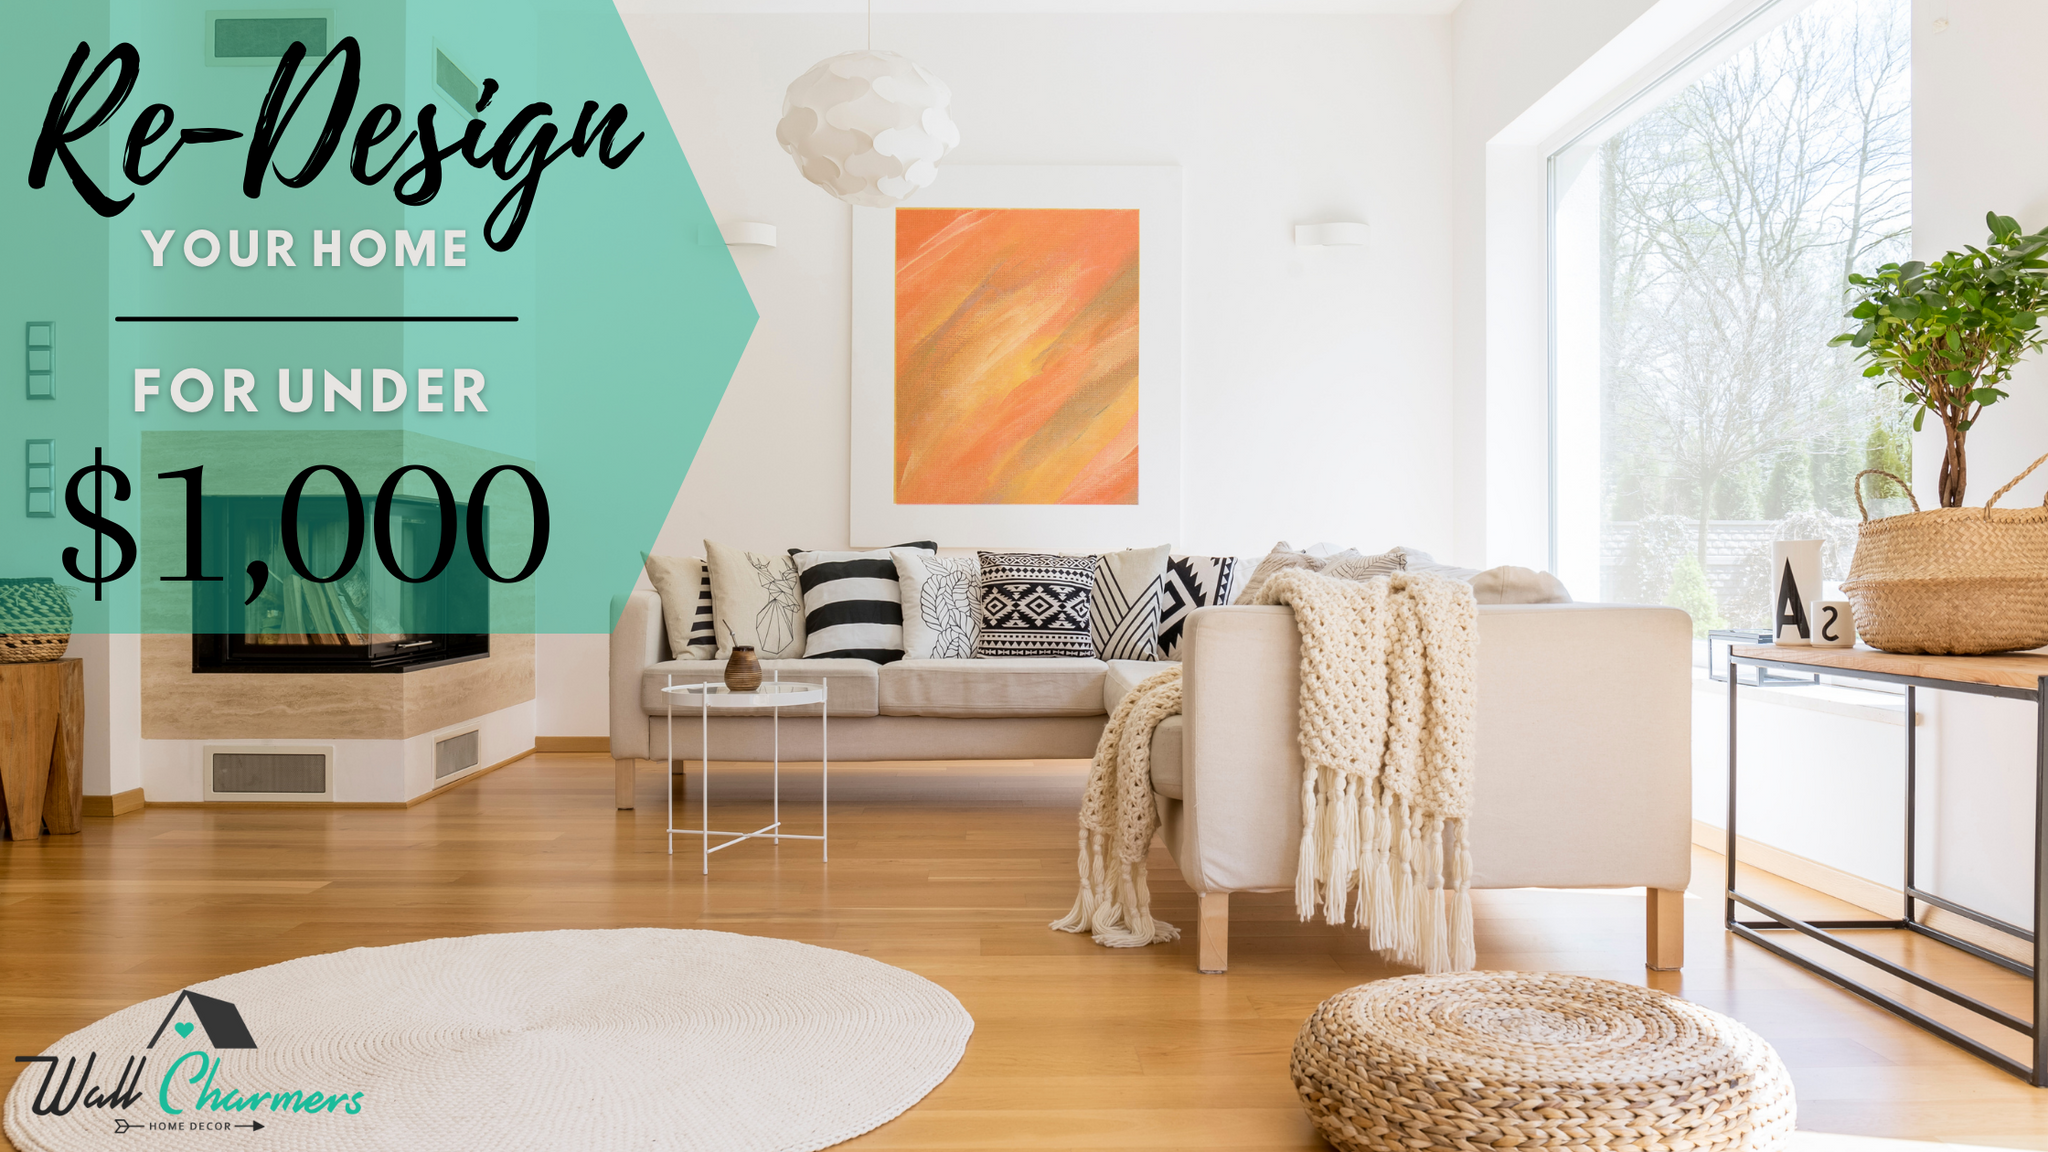 Re-Design your Home for under $1,000